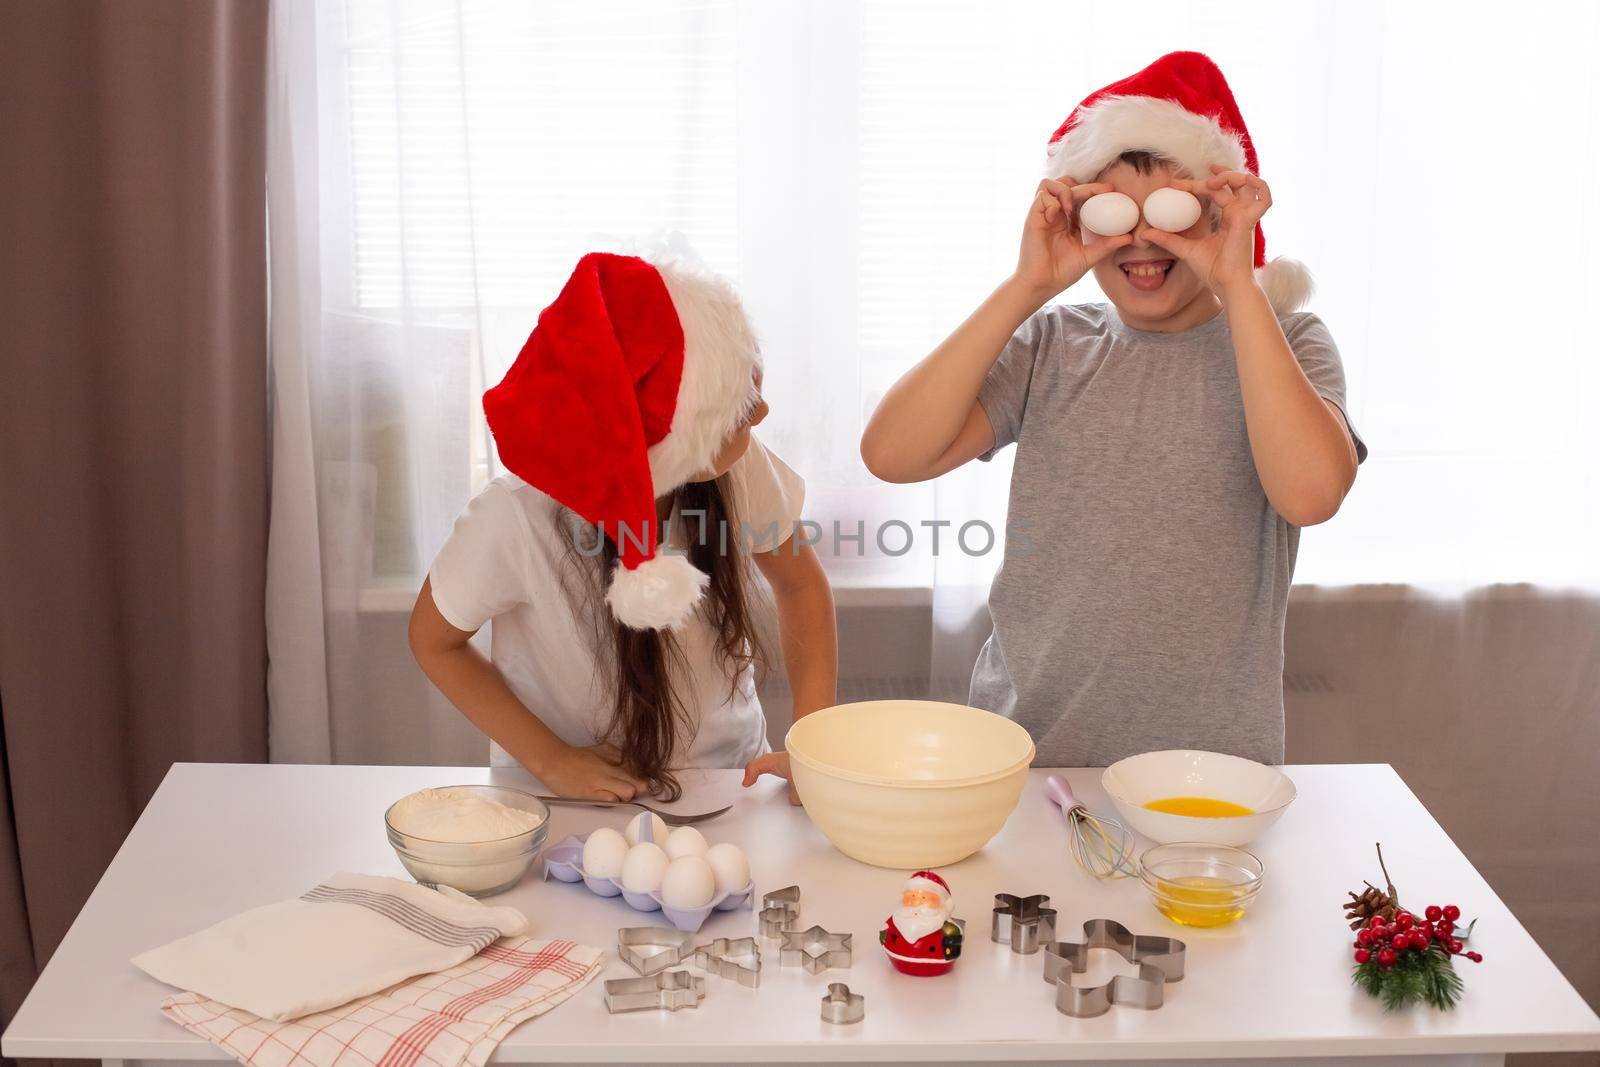 Brother and sister in red caps and light-colored clothes are having fun and preparing Christmas cookies at a white table. Boy holds two white eggs and laughs